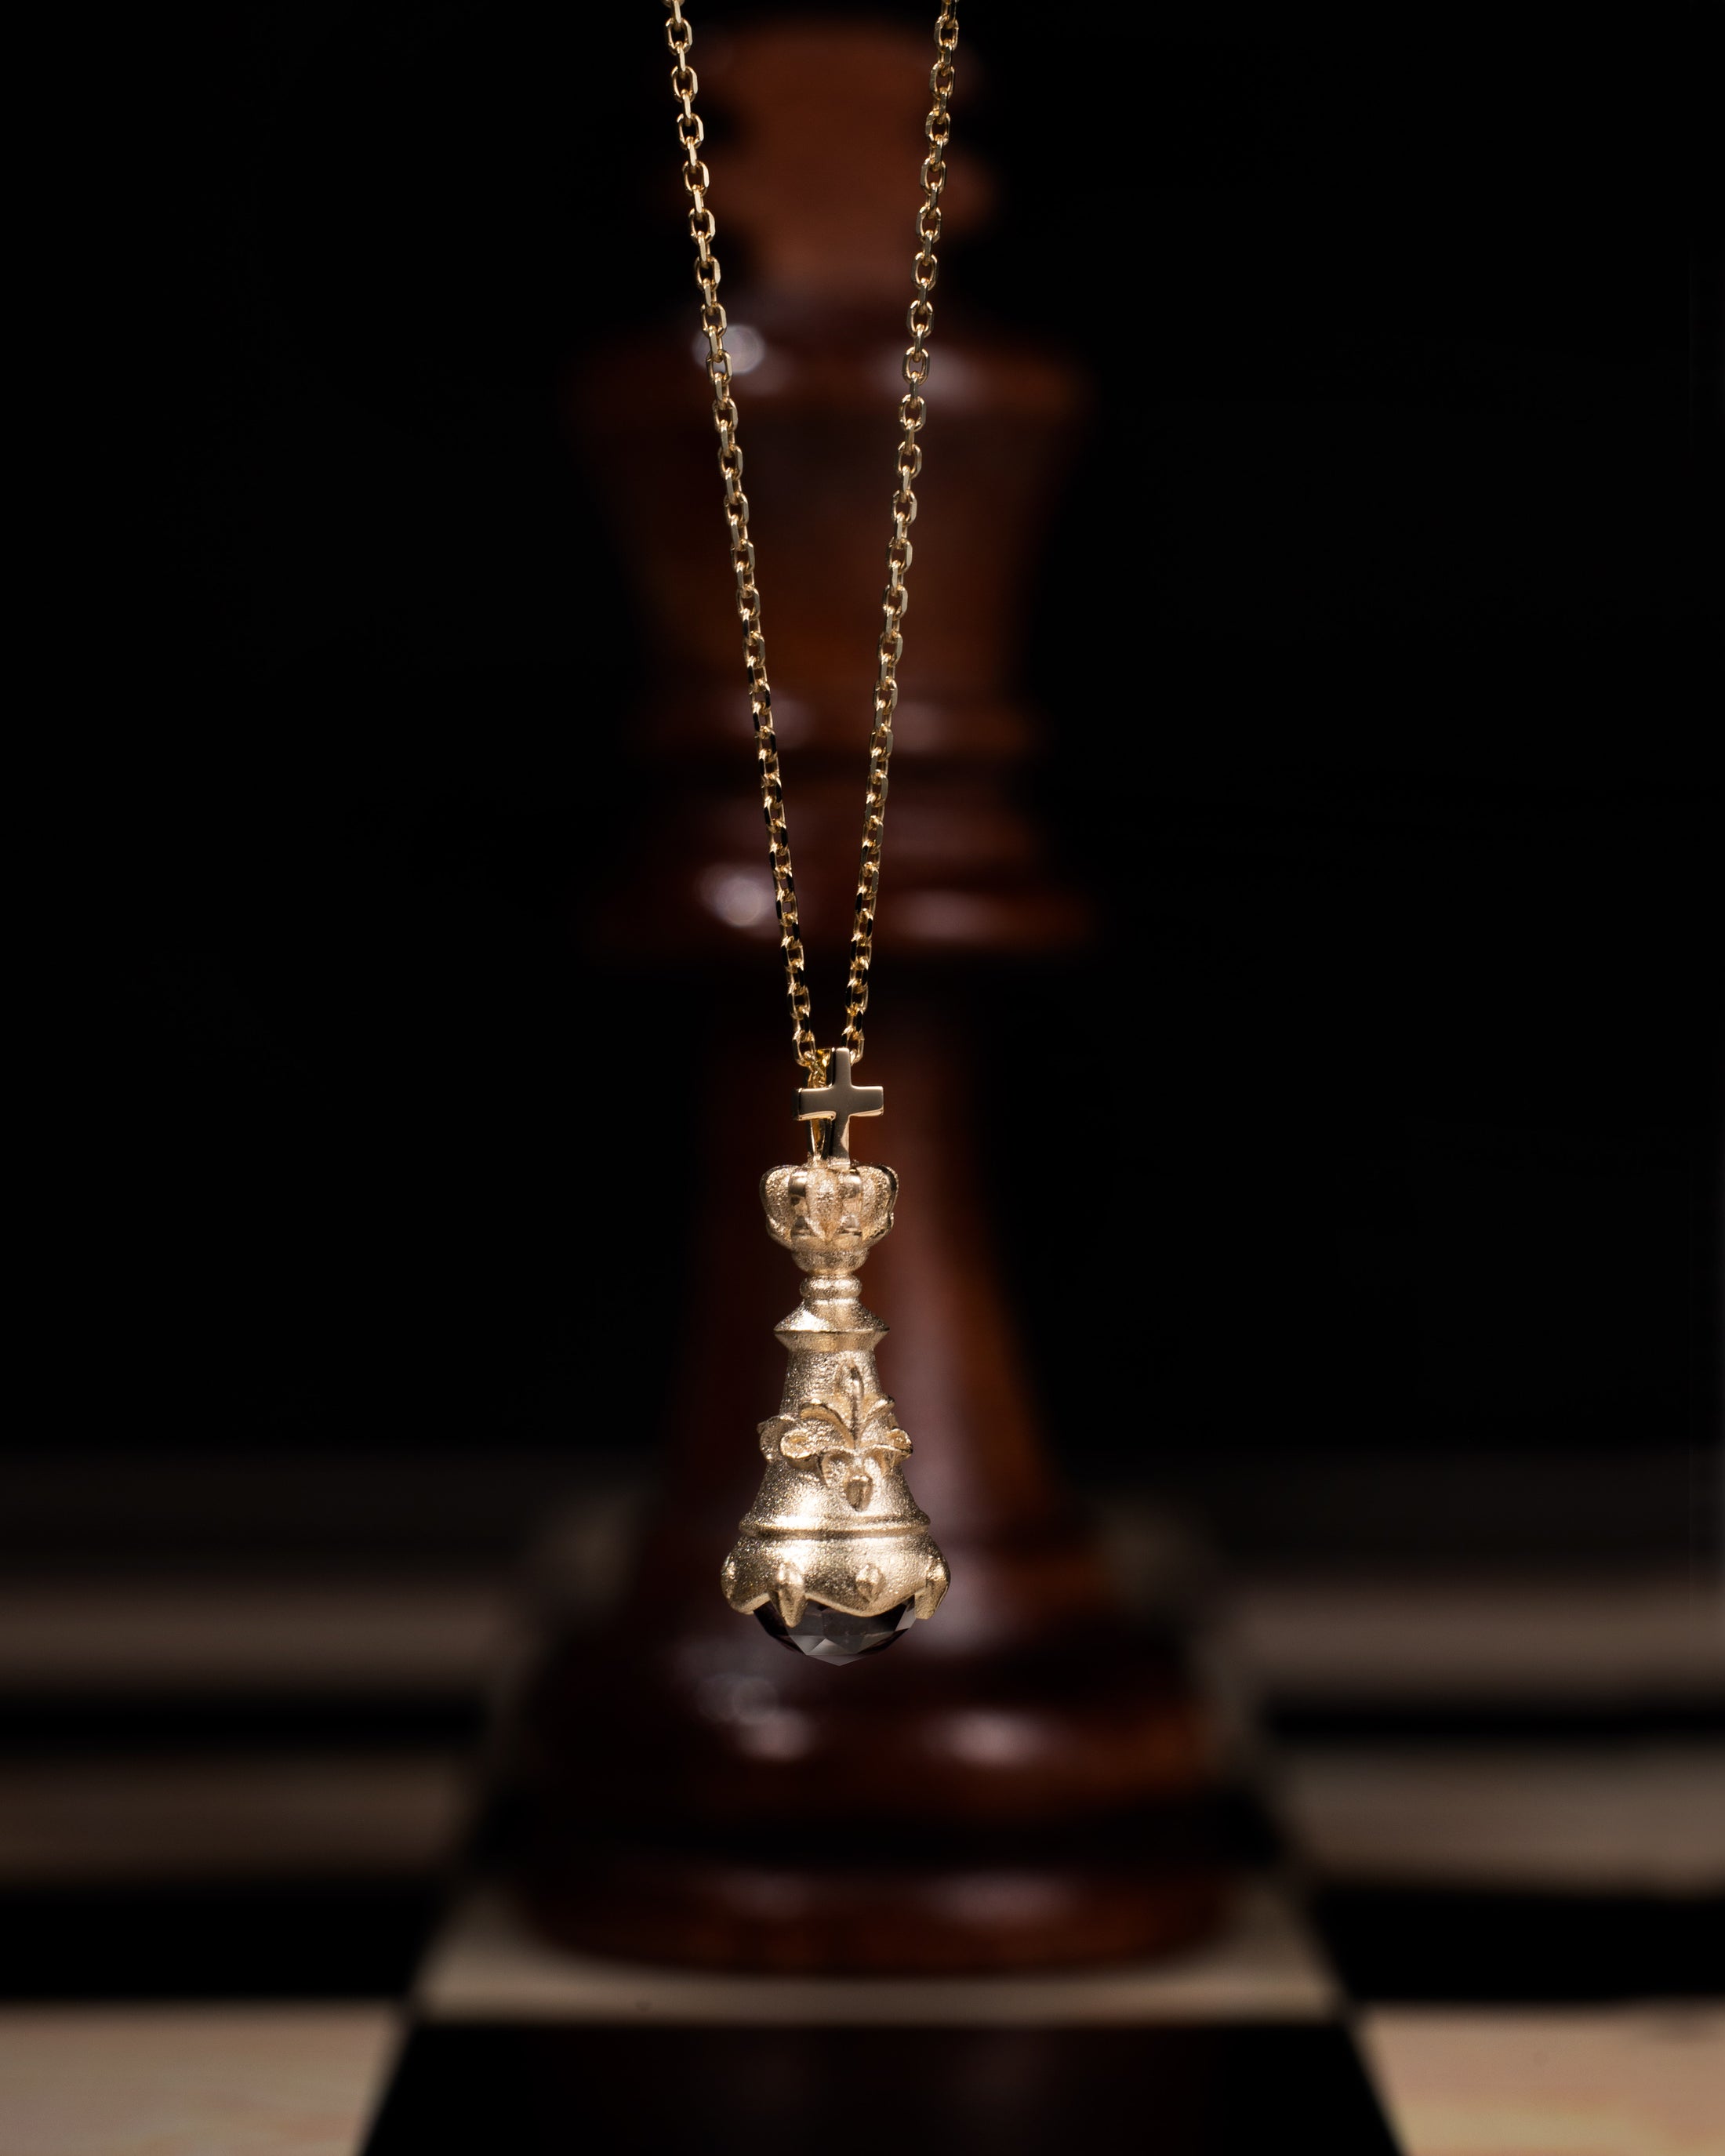 Chess King Pendant Necklace in 10k Gold and Spinel